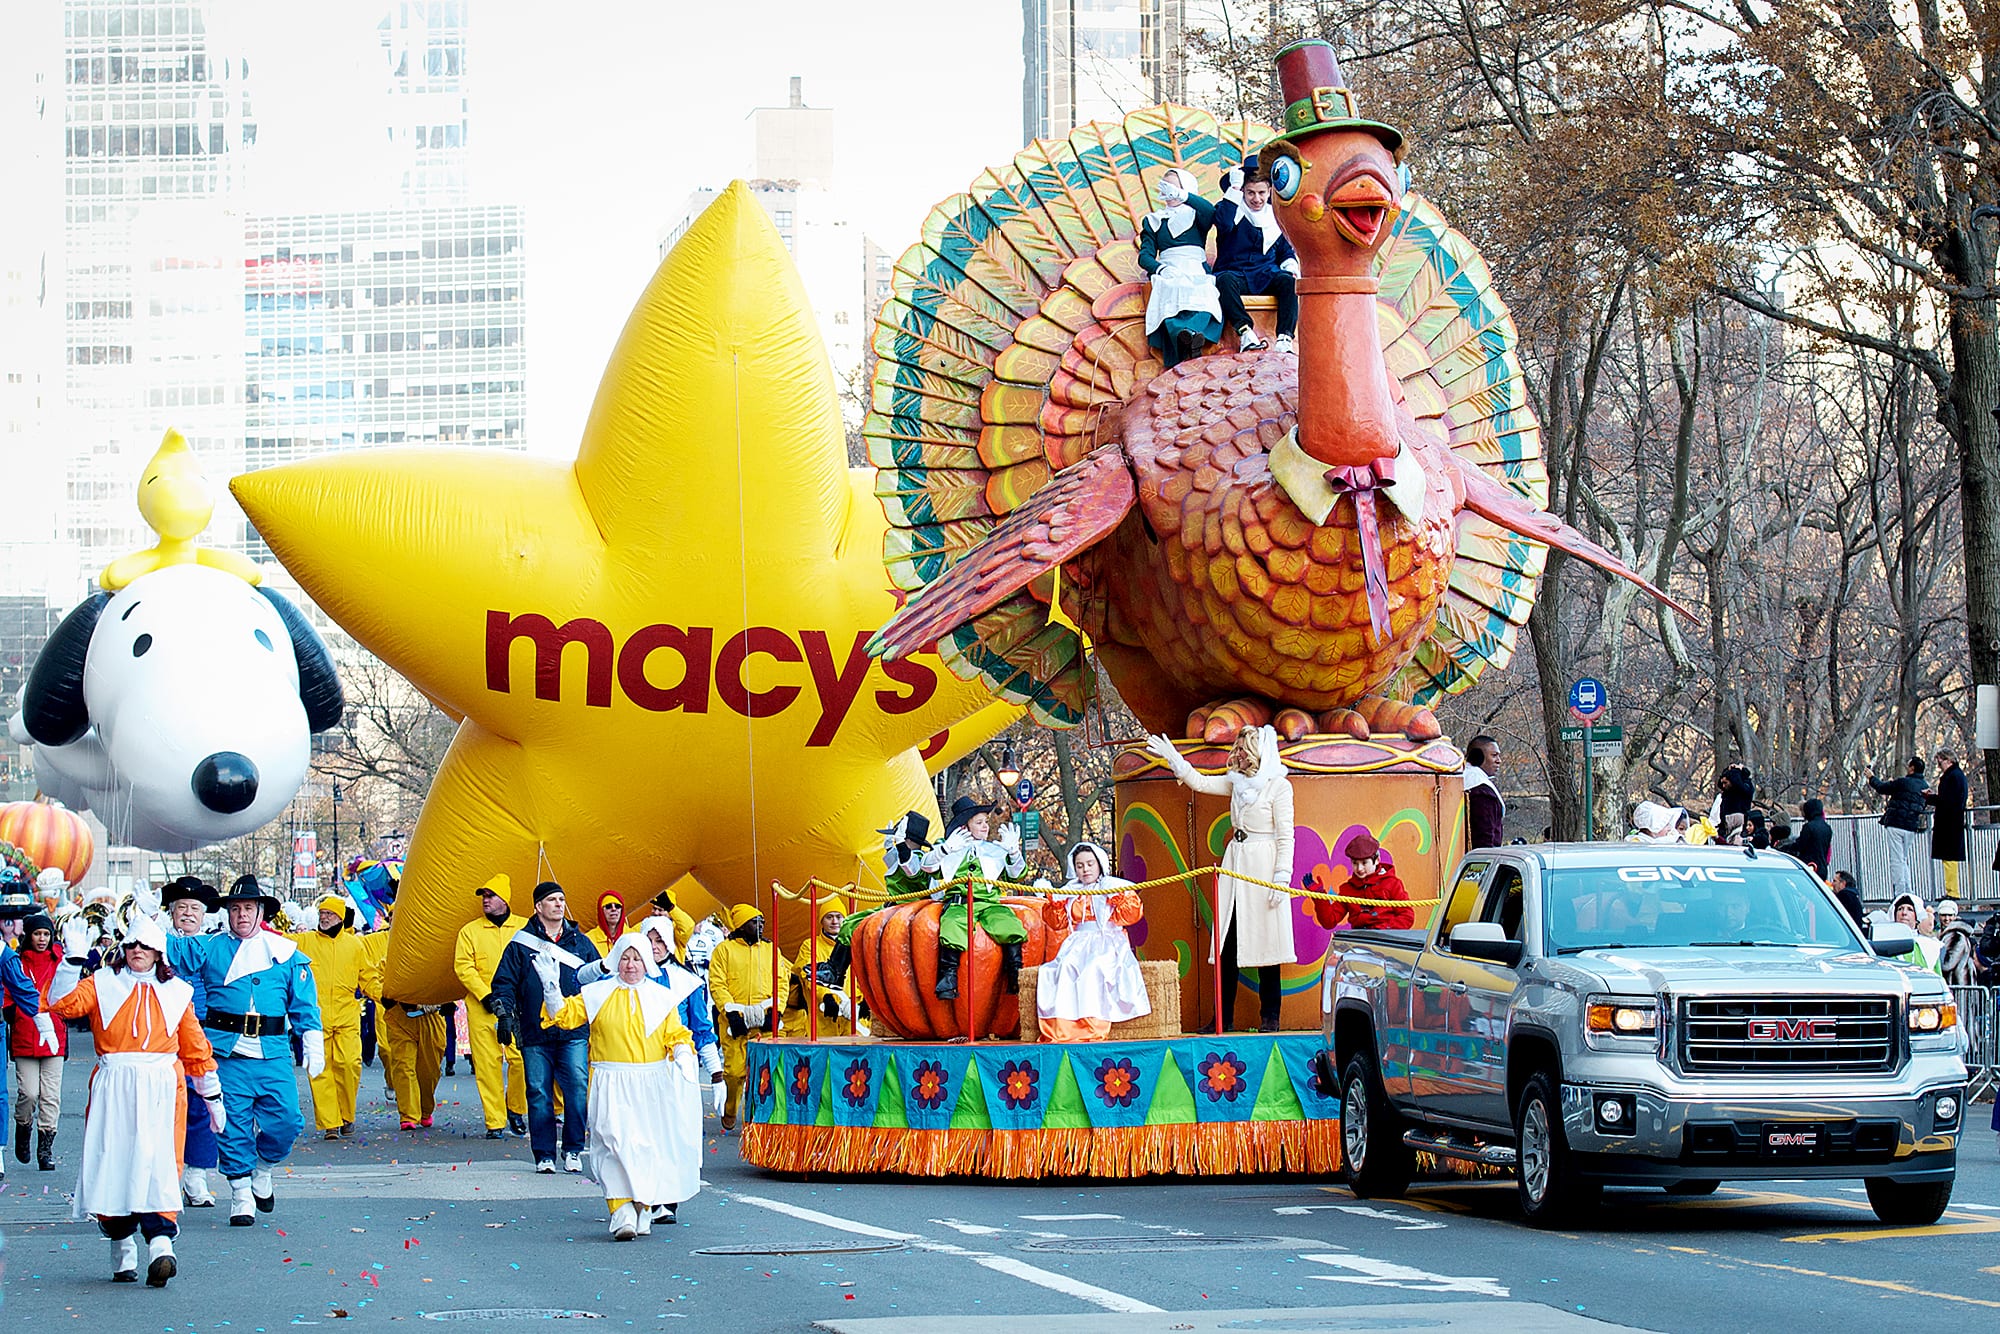 How to Stream the Macy’s Thanksgiving Day Parade on Roku, Fire TV - Stream Macy's Thanksgiving Day Parade 2022